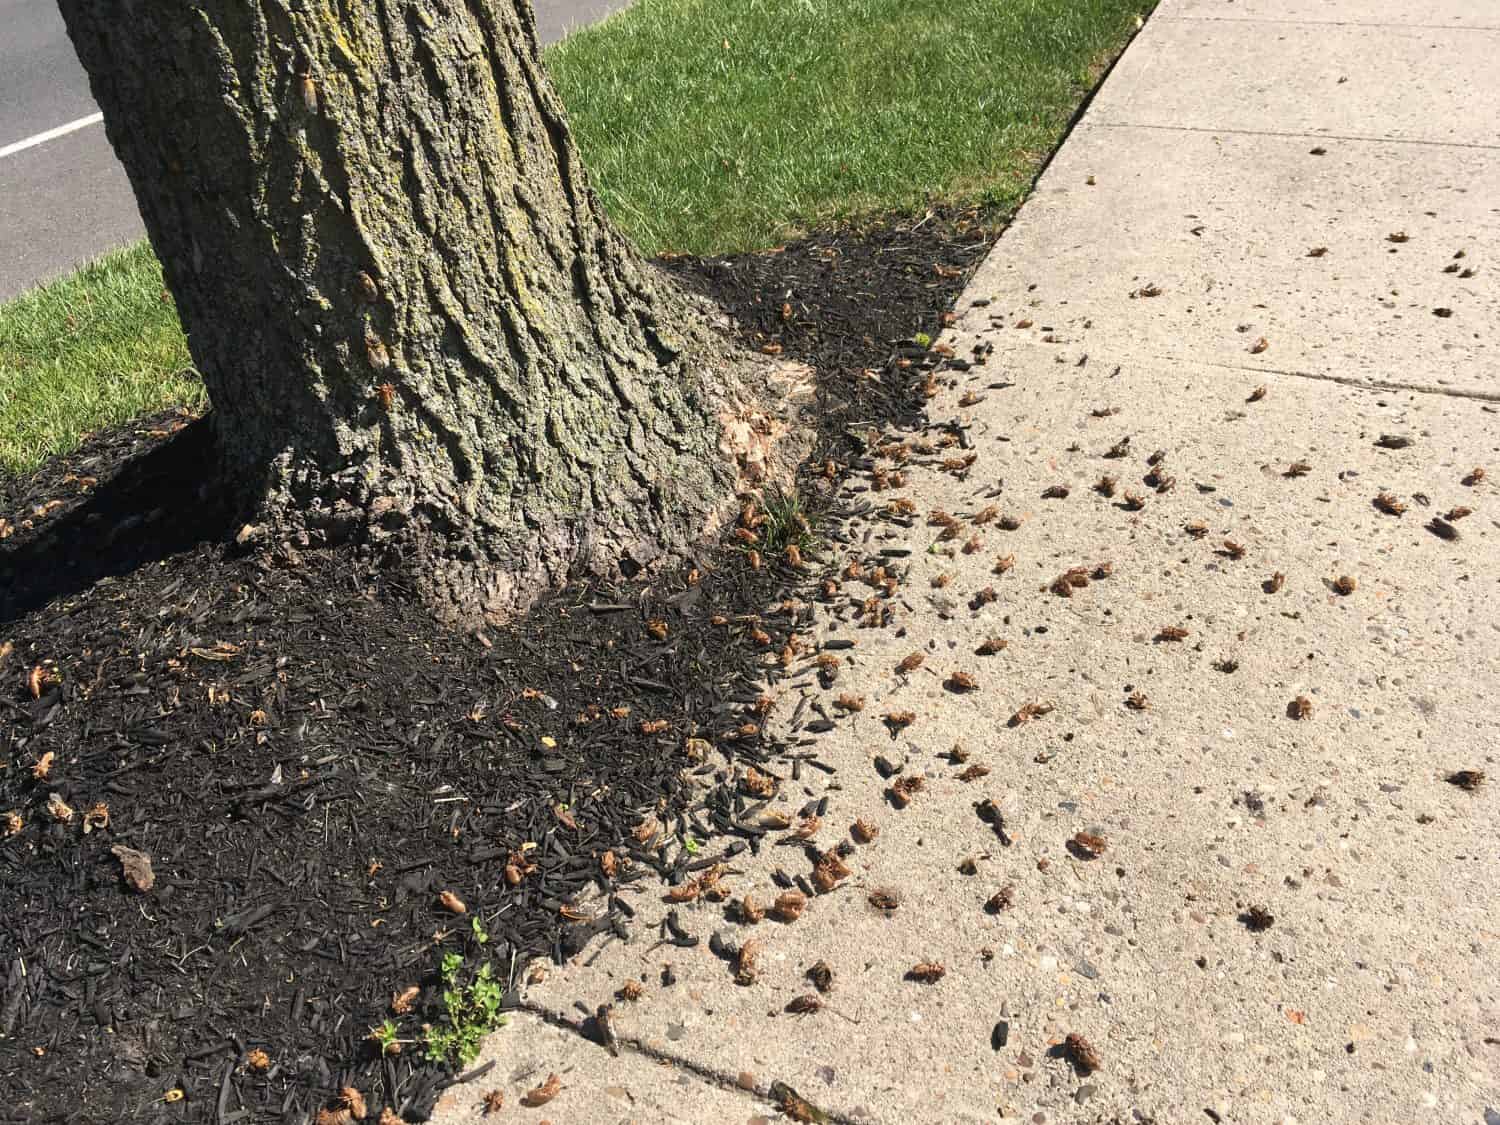 Hundreds of Brood X Cicada Exoskeletons by a tree in Princeton New Jersey 2021